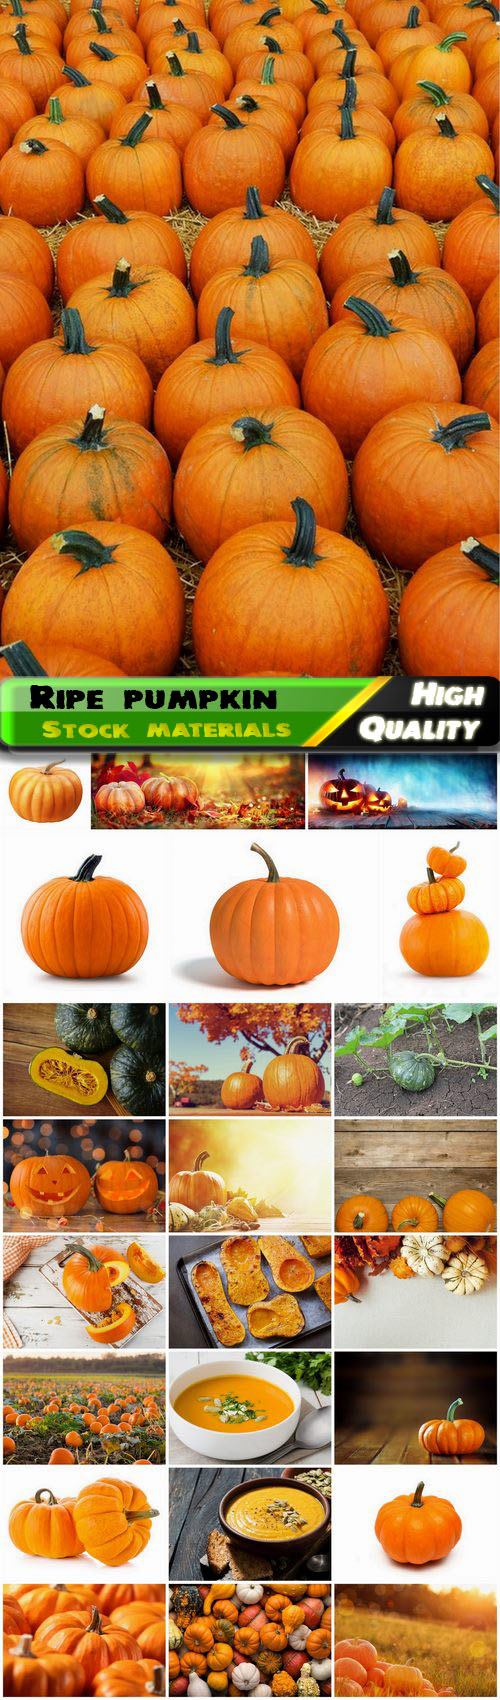 Ripe and green vegetable pumpkin on the field 25 HQ Jpg